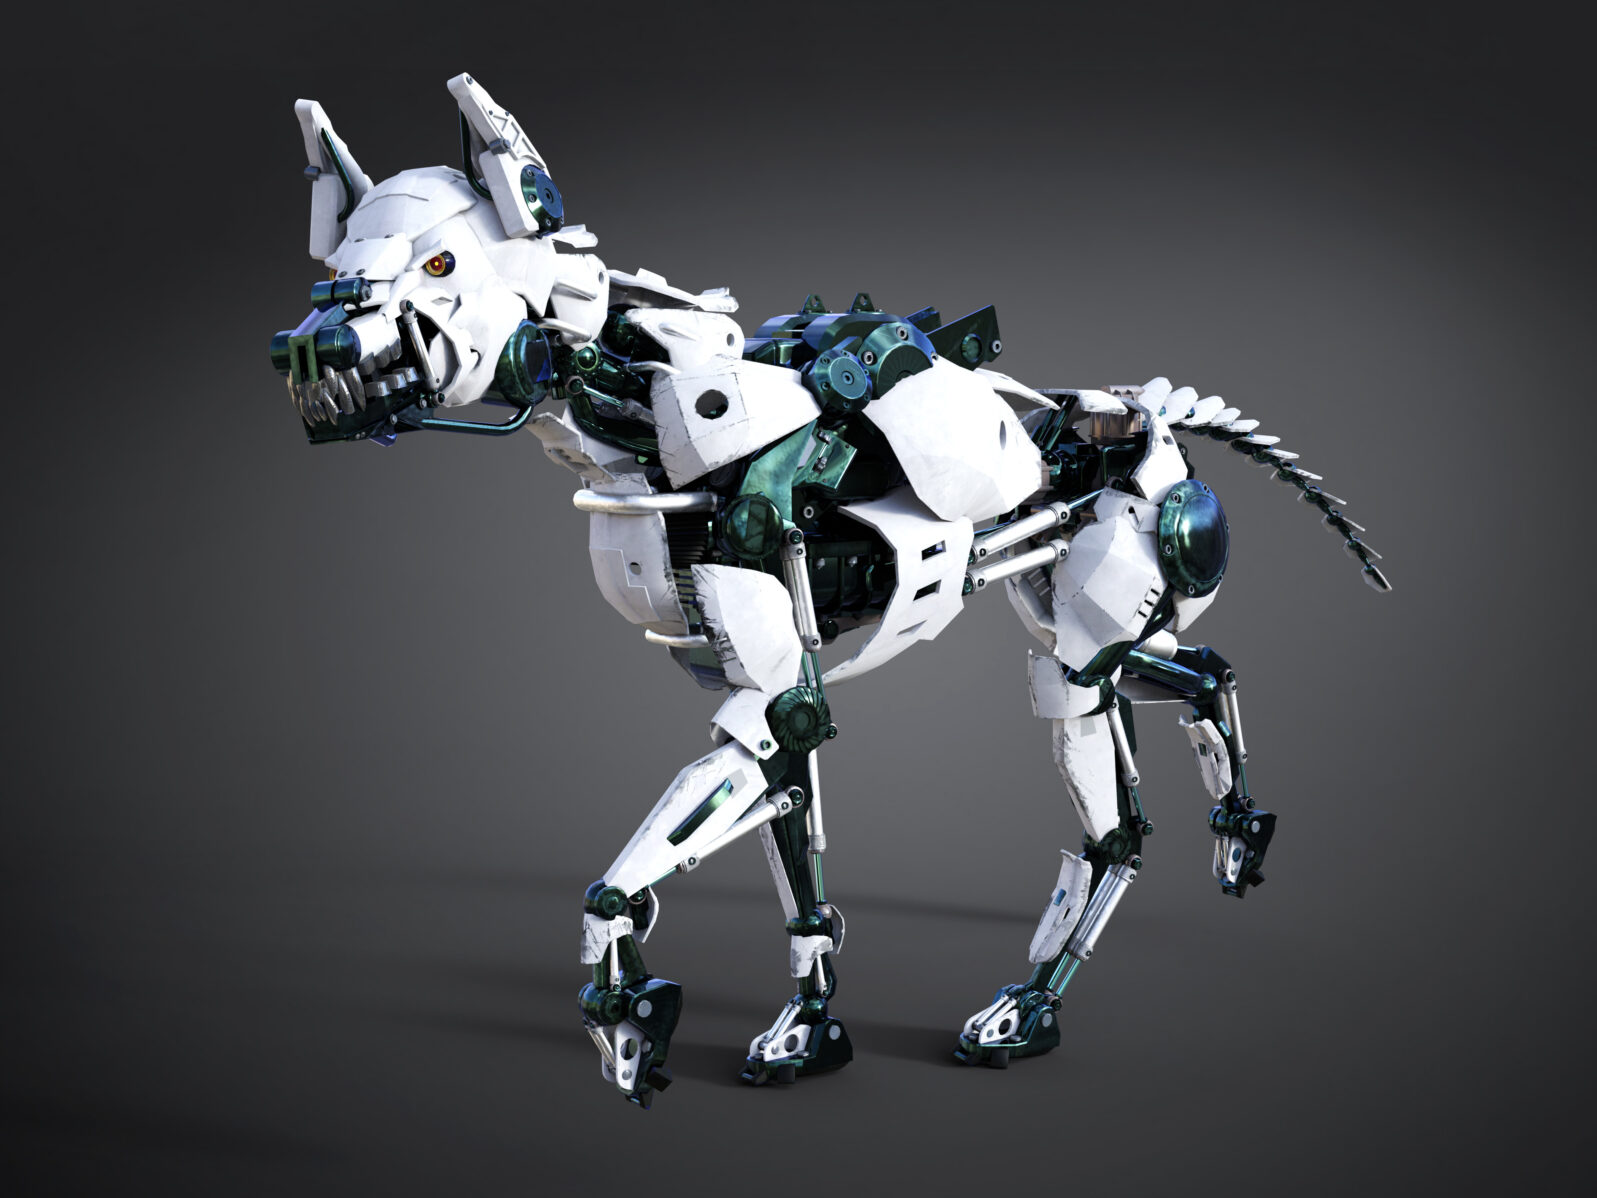 3D rendering of a futuristic robot dog.